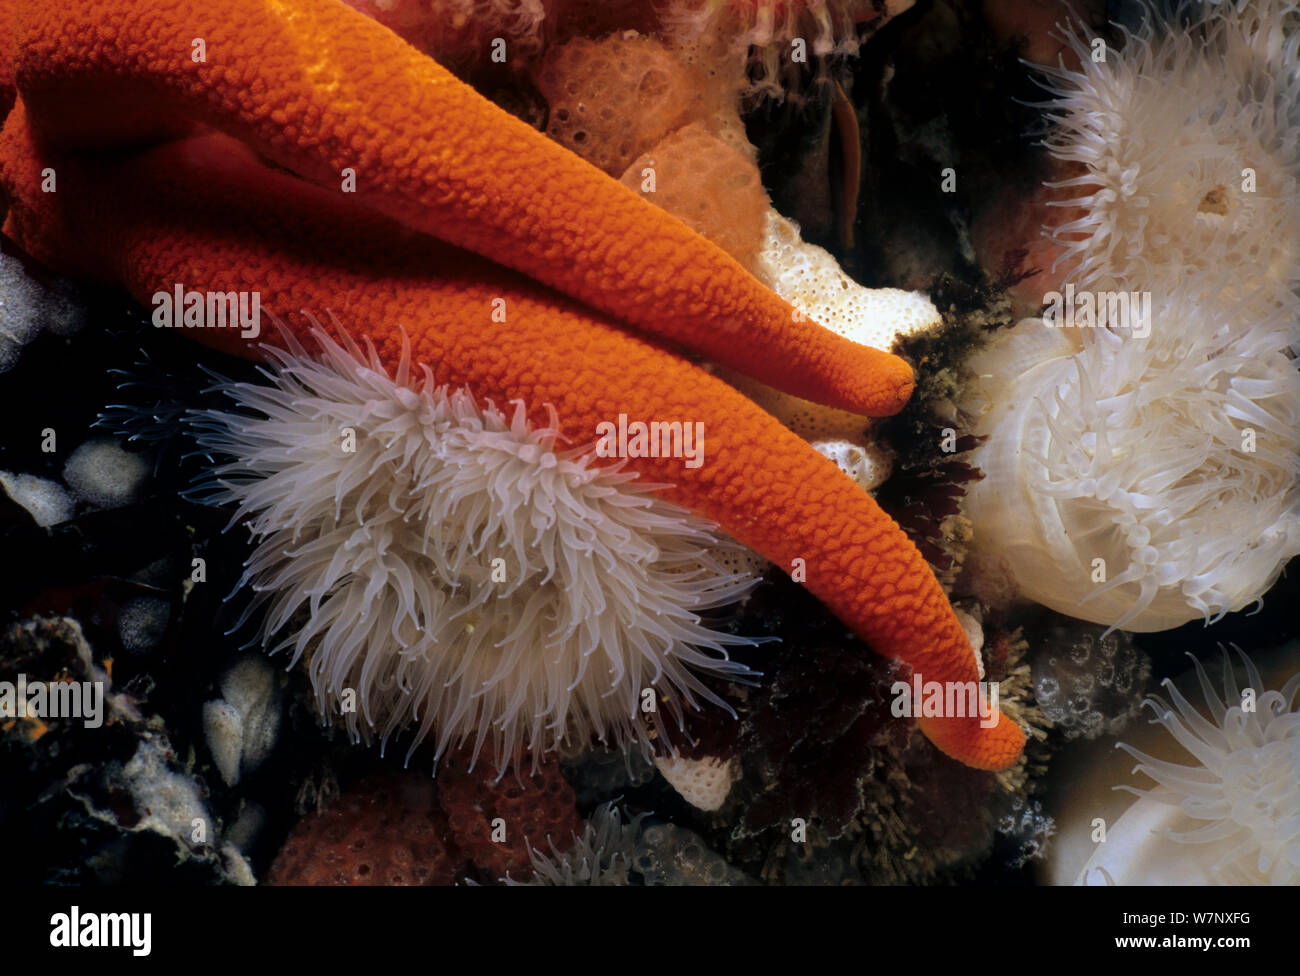 Blood Star (Henrica leviuscula) arms close up over sea anemones, Queen Charlotte Strait, British Columbia, Canada, North Pacific Ocean. Stock Photo